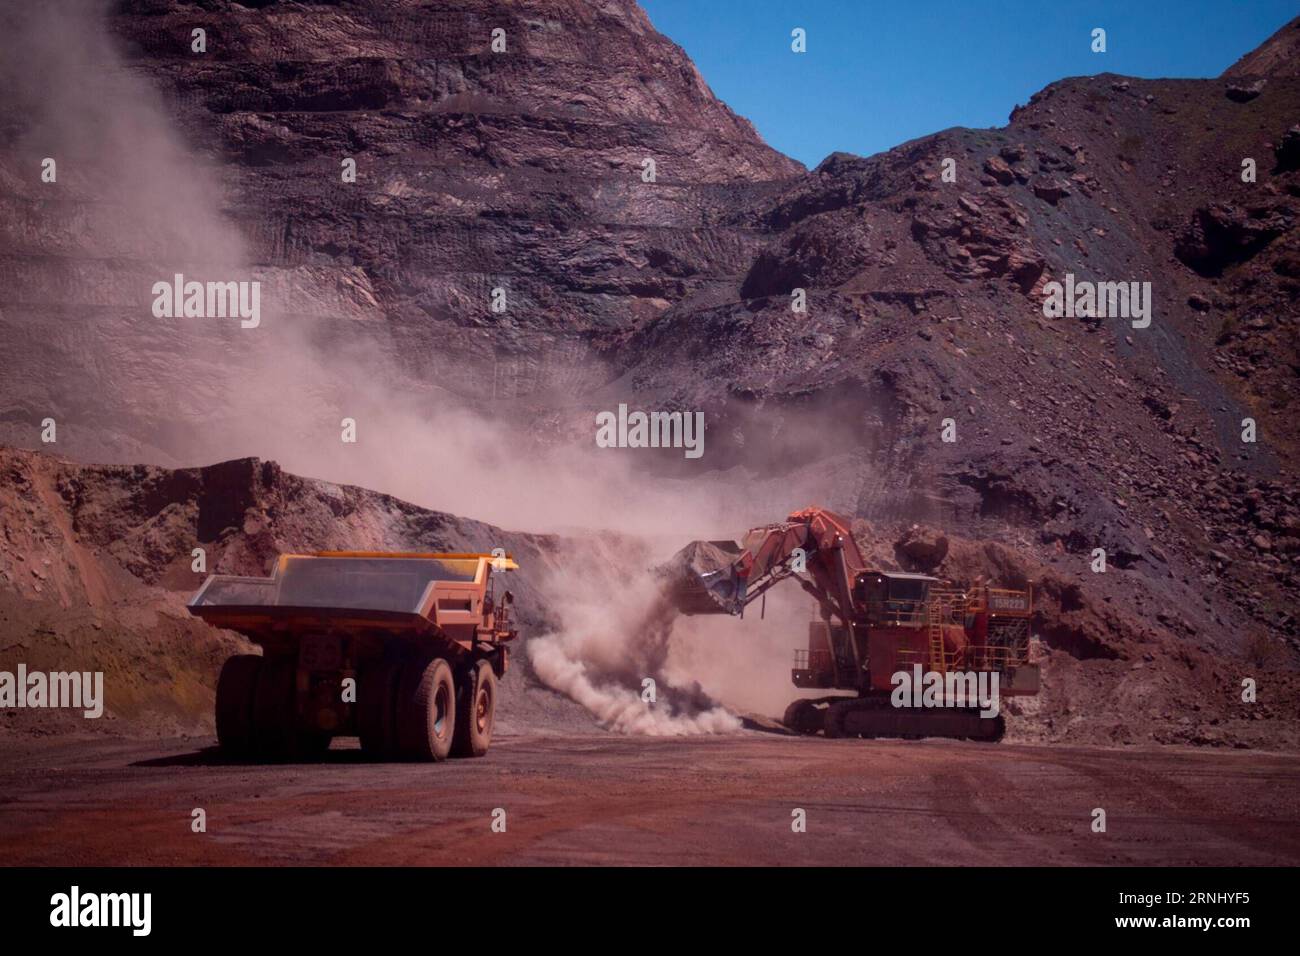 161220 -- SYDNEY, Dec. 20, 2016 -- A dump truck takes waste material from Rio Tinto Ltd. s Paraburdoo mine in Pilbara region, Australia, Dec. 14, 2016. Rio Tinto is currently in negotiations with steel makers Baosteel Group and Shougang Group over a new pricing mechanism for its Australian ore, however the key customers haven t yet agreed to the terms. Rio Tinto s seeking of a new pricing mechanism for its iron ore with Chinese customers is justified given the dramatic lift in coking coal prices, chief executive Jean-Sebastian Jacques believes. zcc AUSTRALIA-RIO TINTO LTD.-OPERATION MattxBurge Stock Photo